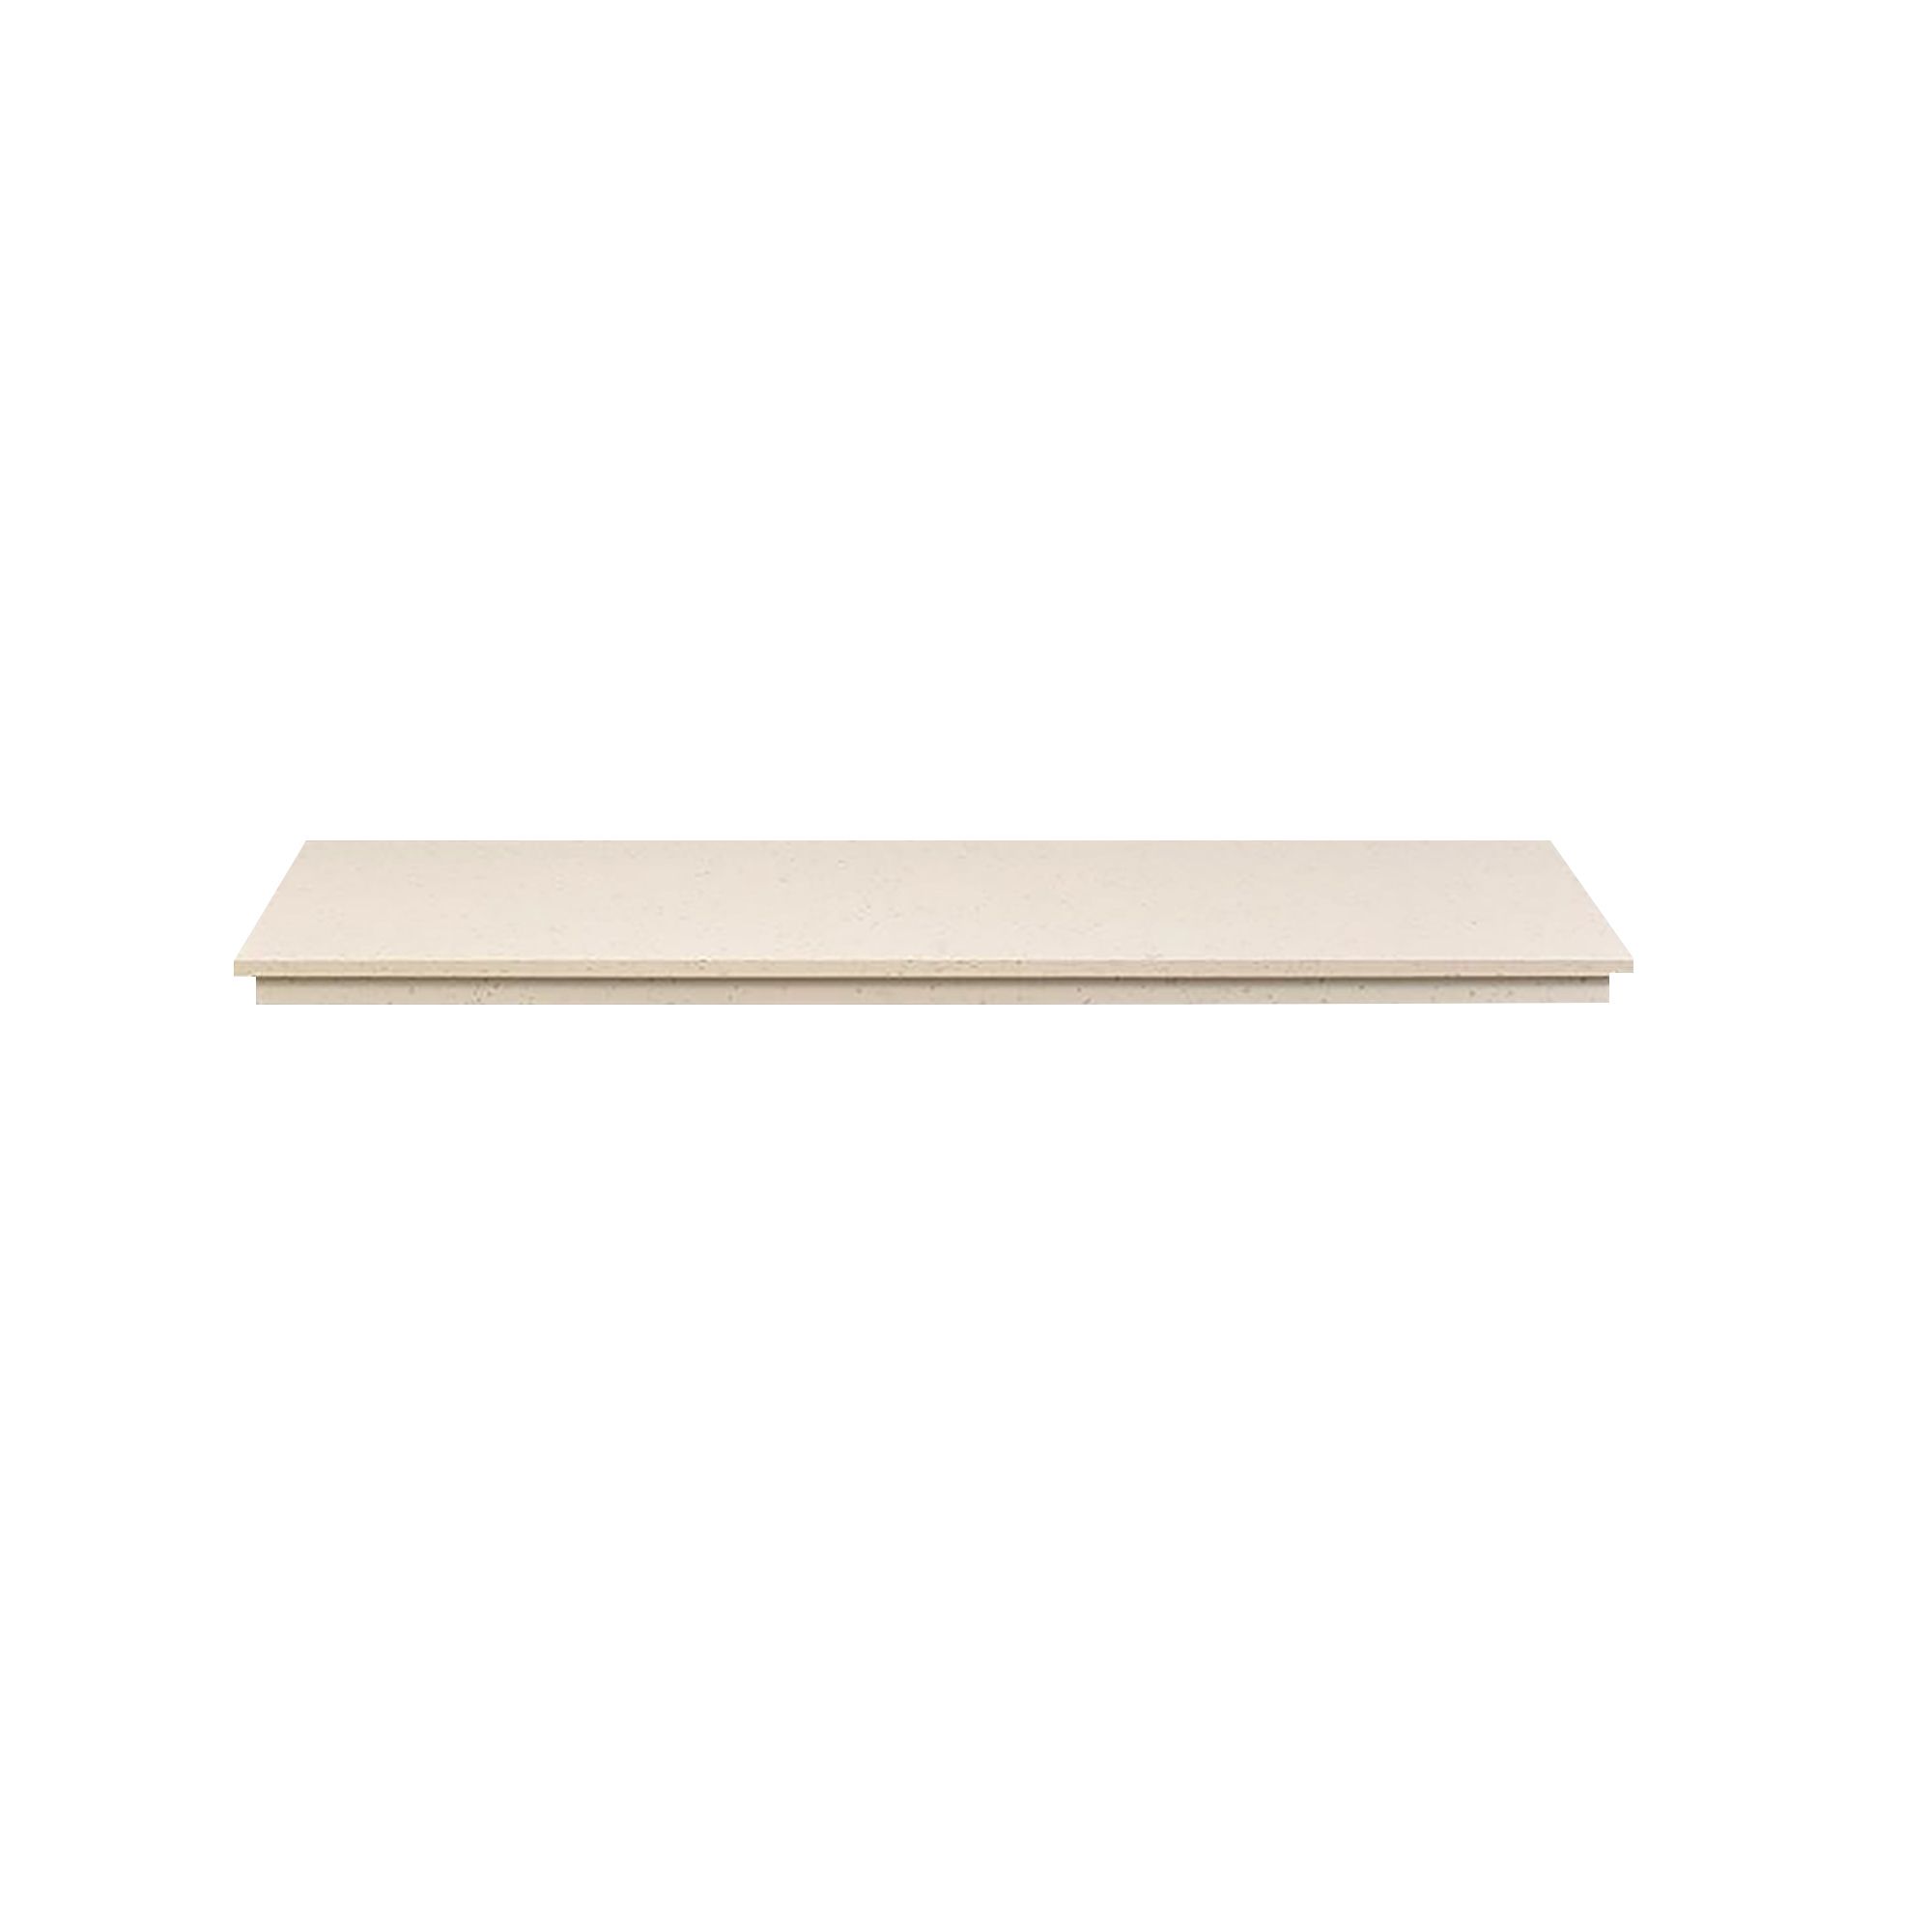 Focal Point Contemporary Stone effect Back panel & hearth (W)1250mm (D)380mm